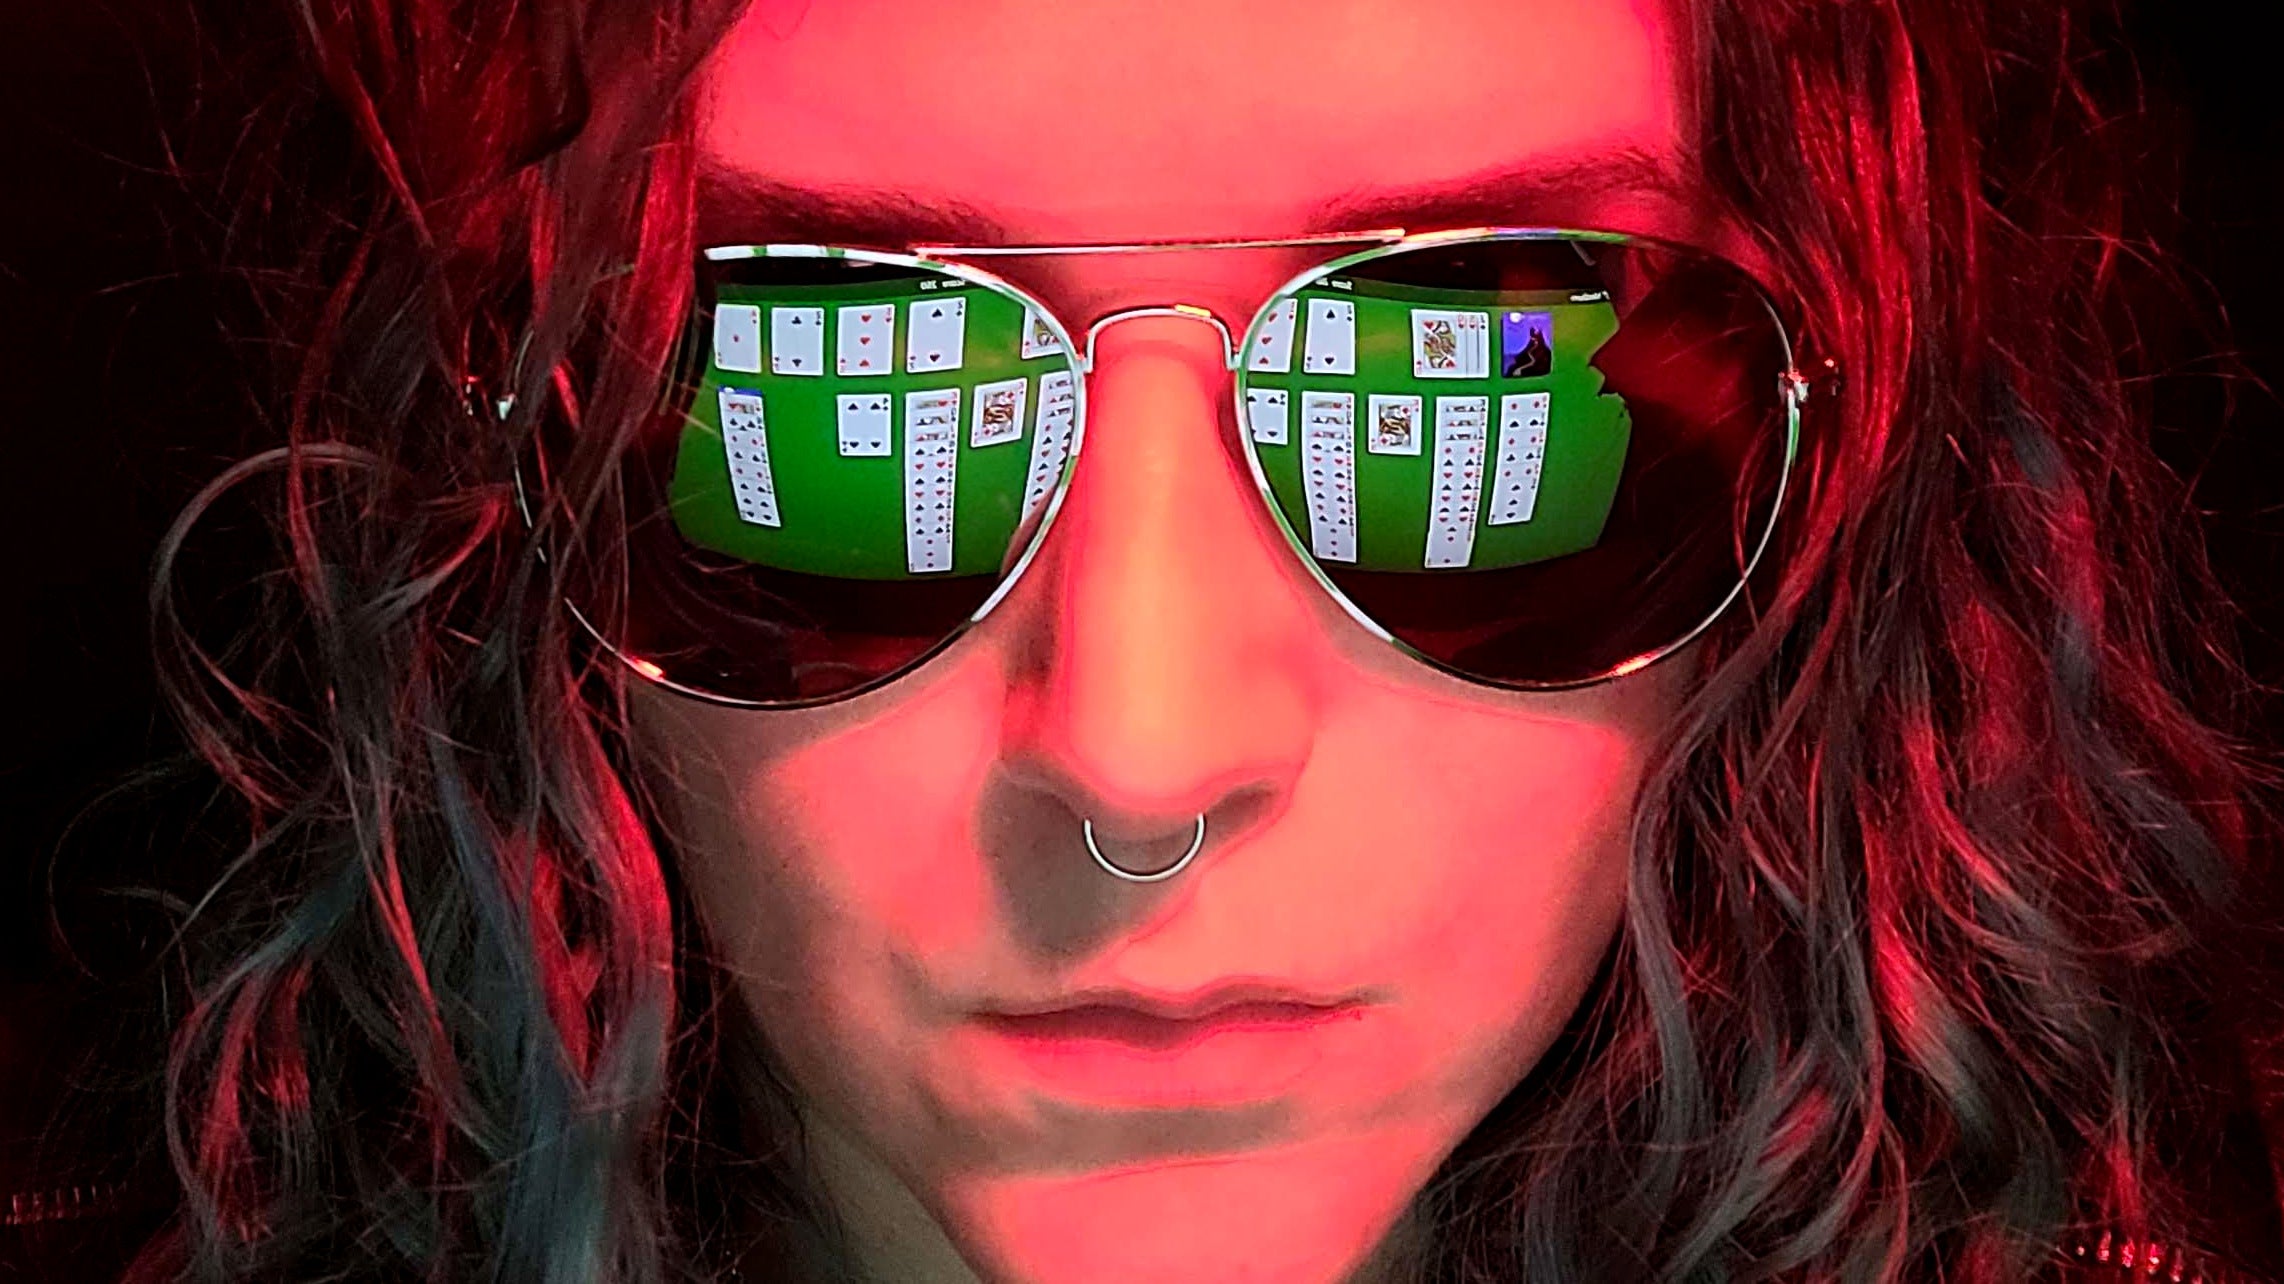 The face of a woman bathed in red light with Windows Solitaire reflected in the lenses of her mirrorshades.